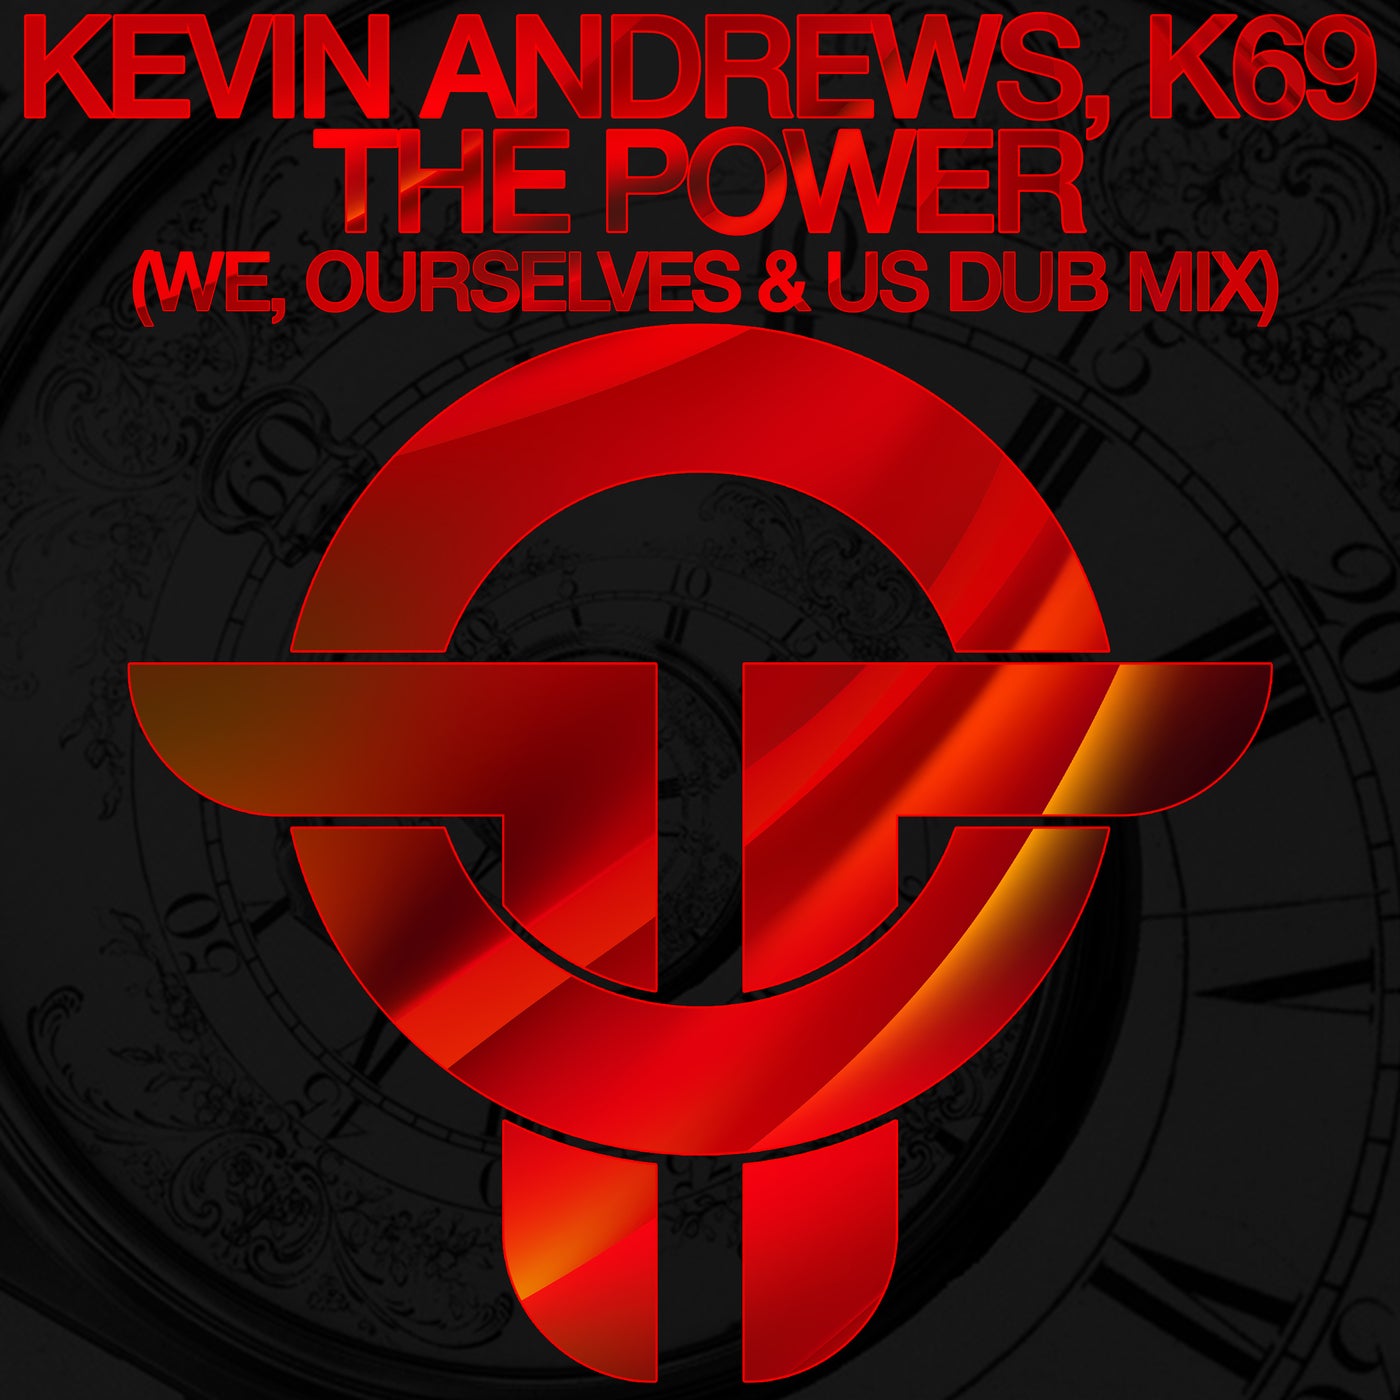 Kevin Andrews & K69 - The Power [Twists Of Time]